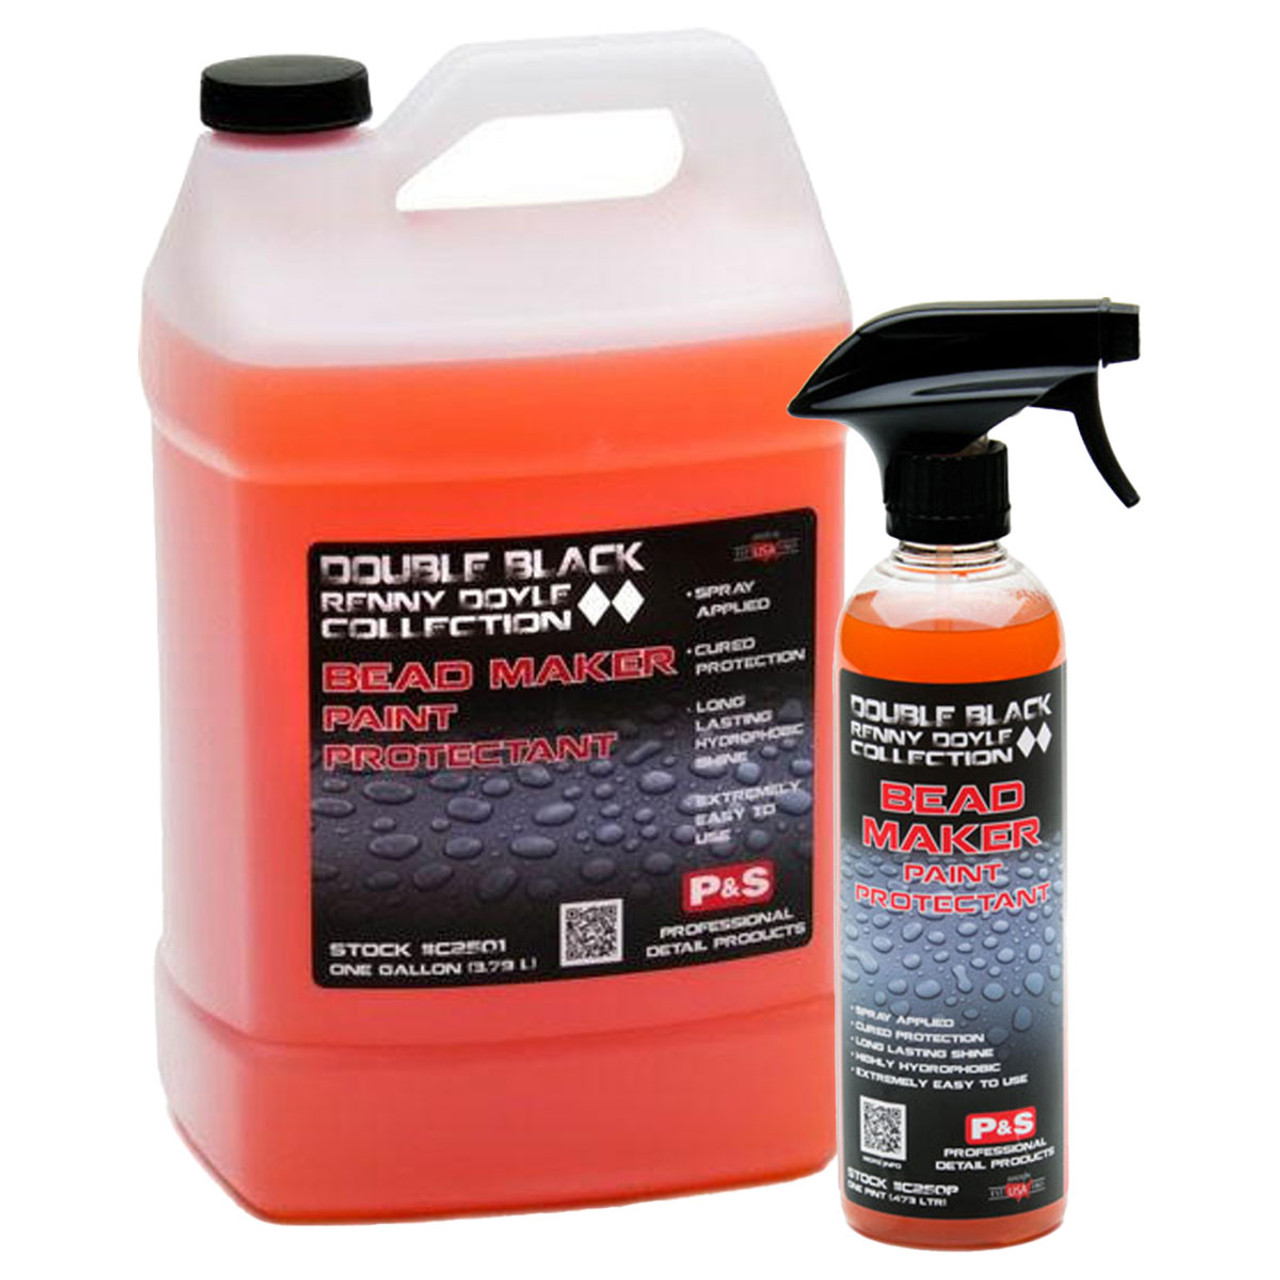 Mothers Carpet & Upholstery All Fabric Cleaner - Team Grand Wagoneer